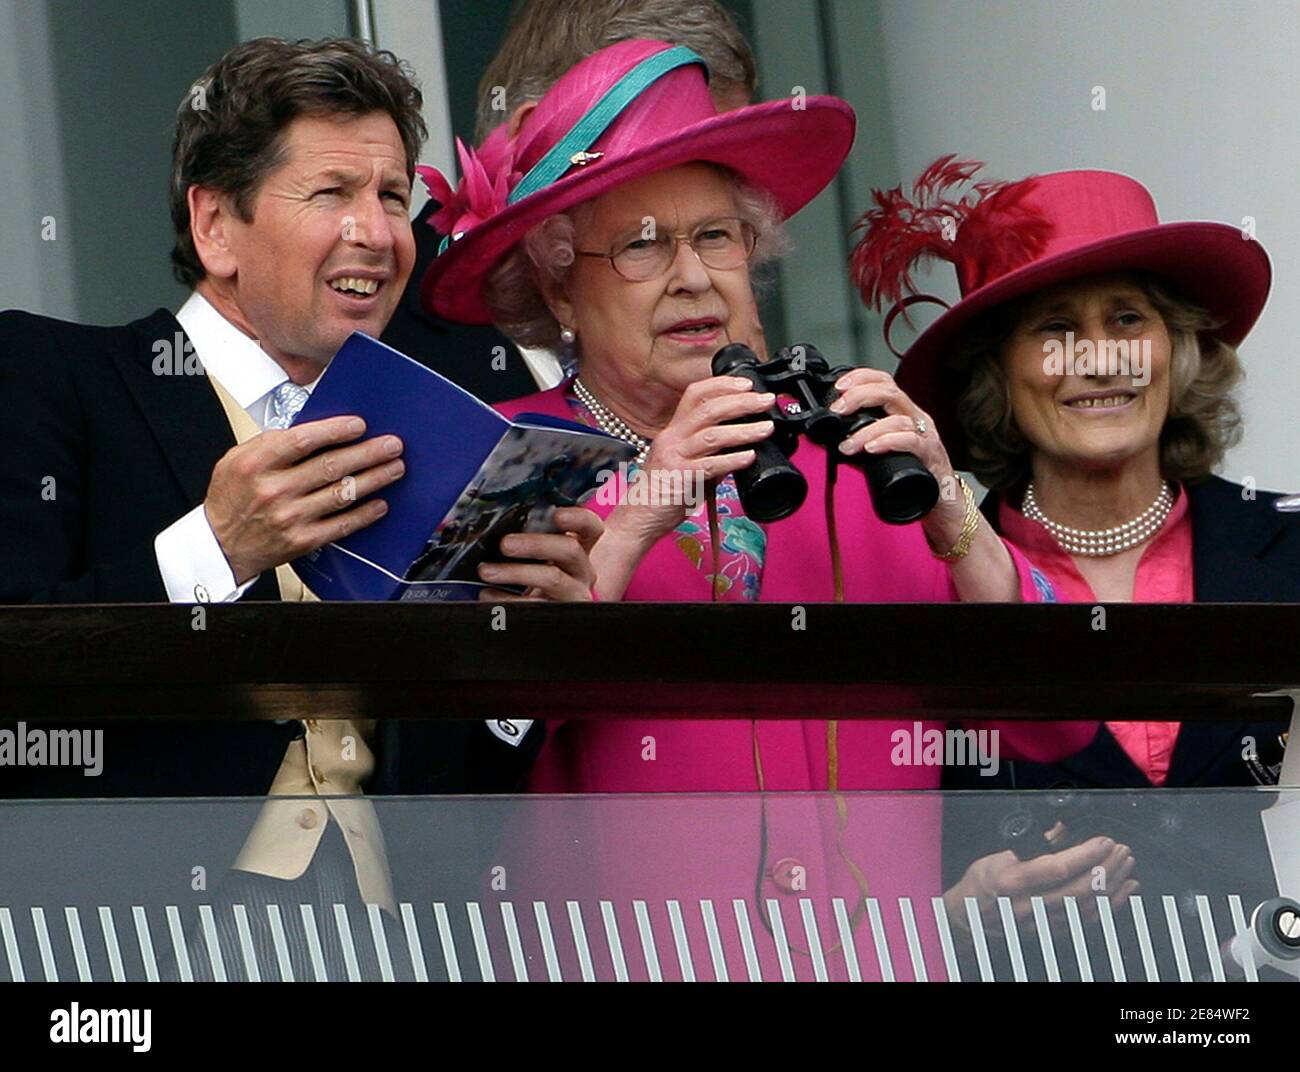 Britain's Queen Elizabeth (C) watches during the Epsom Derby Festival at Epsom Downs in Surrey, southern England, June 7, 2008.    REUTERS/Darren Staples   (BRITAIN) Stock Photo